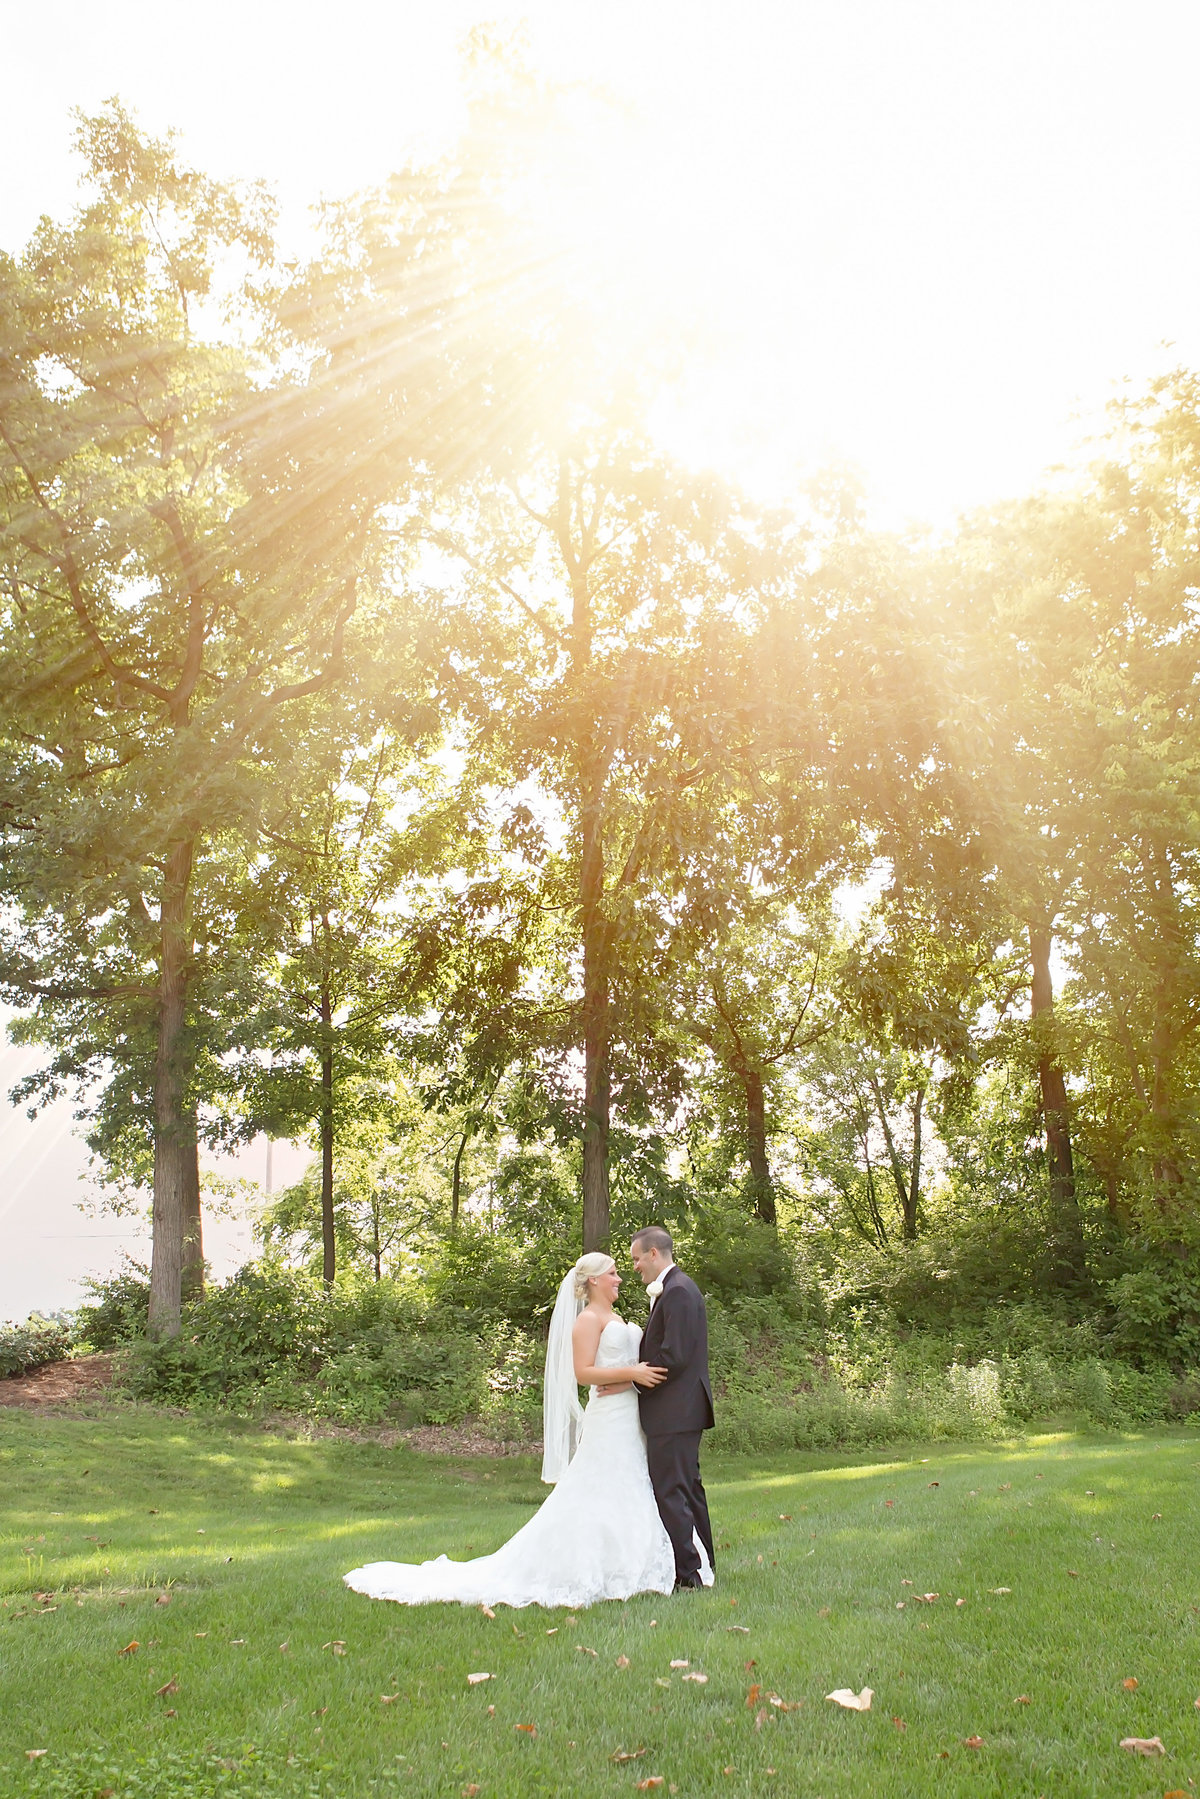 Weddings - Holly Dawn Photography - Wedding Photography - Family Photography - St. Charles - St. Louis - Missouri -110